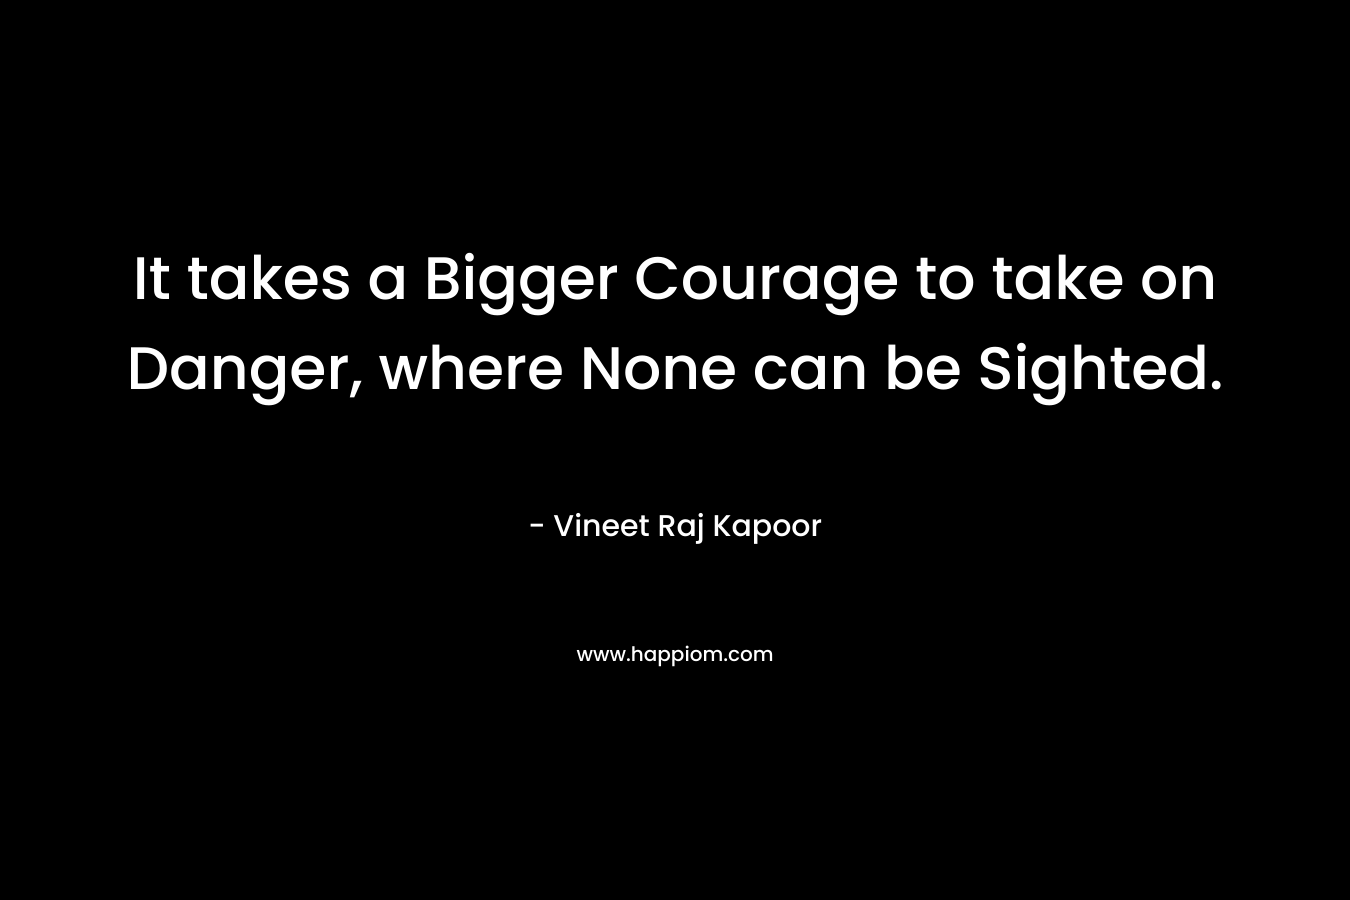 It takes a Bigger Courage to take on Danger, where None can be Sighted.